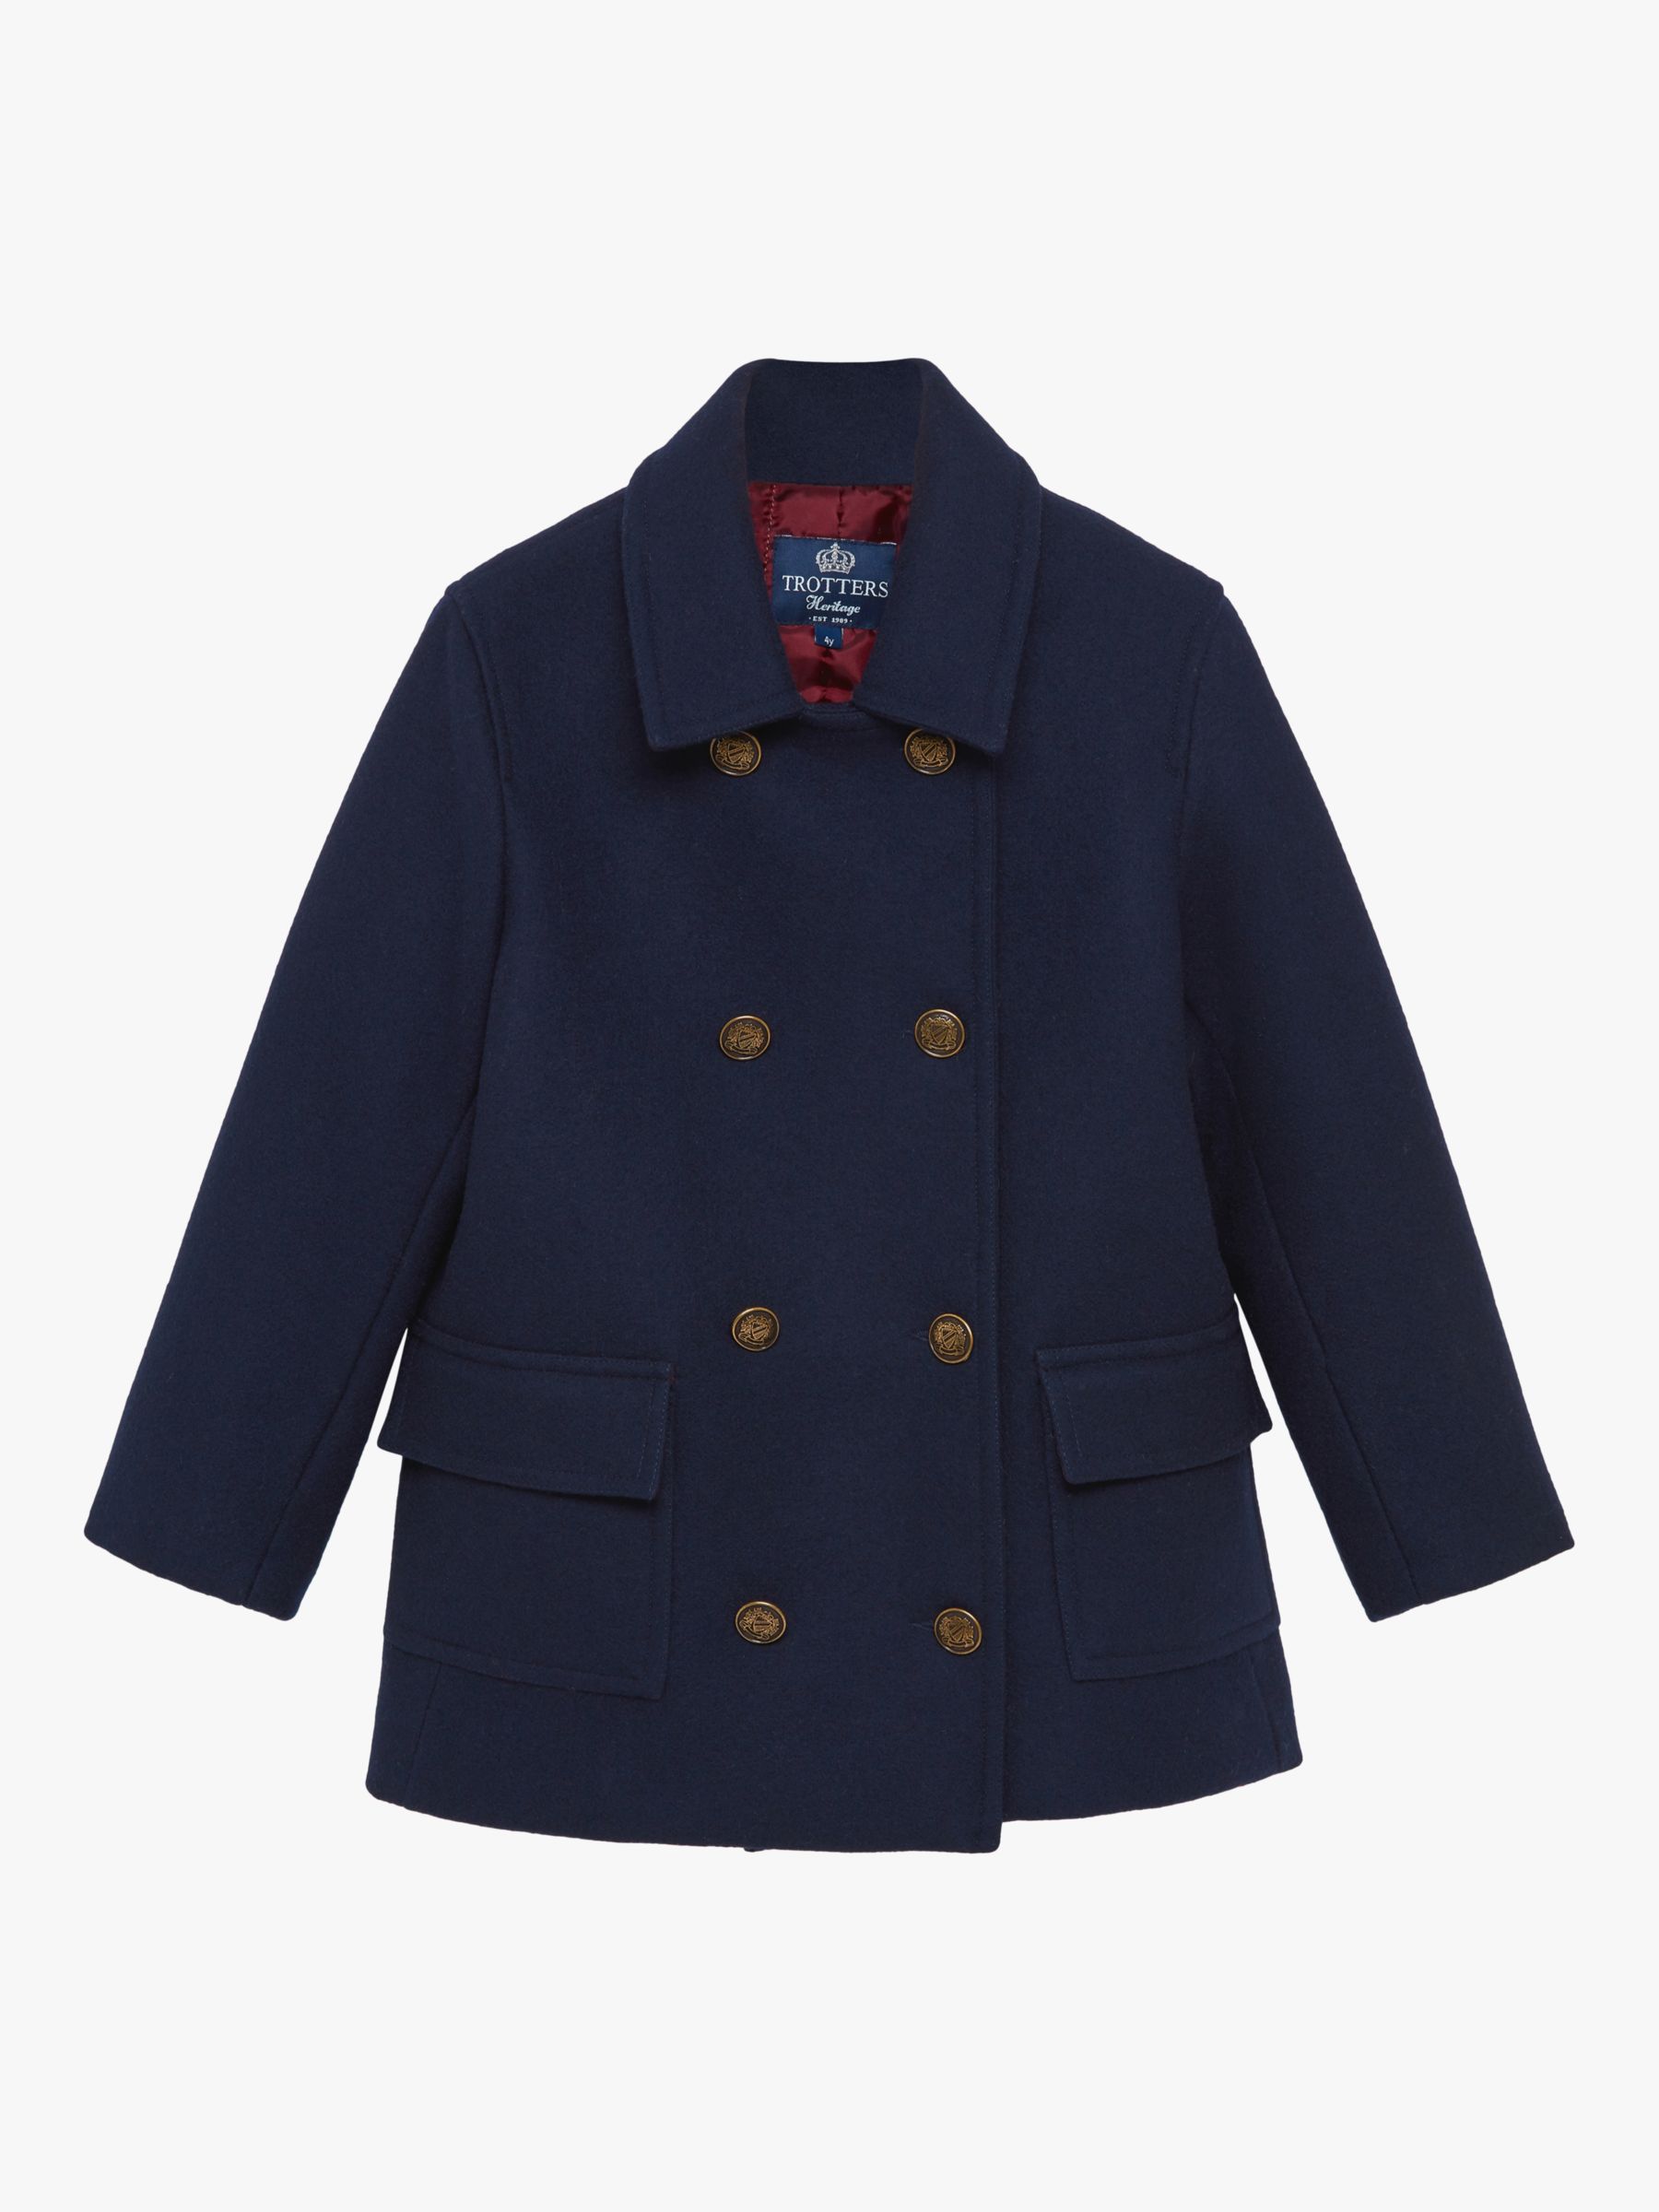 Trotters Kids' Double Breasted Wool Coat, Navy, 2 years